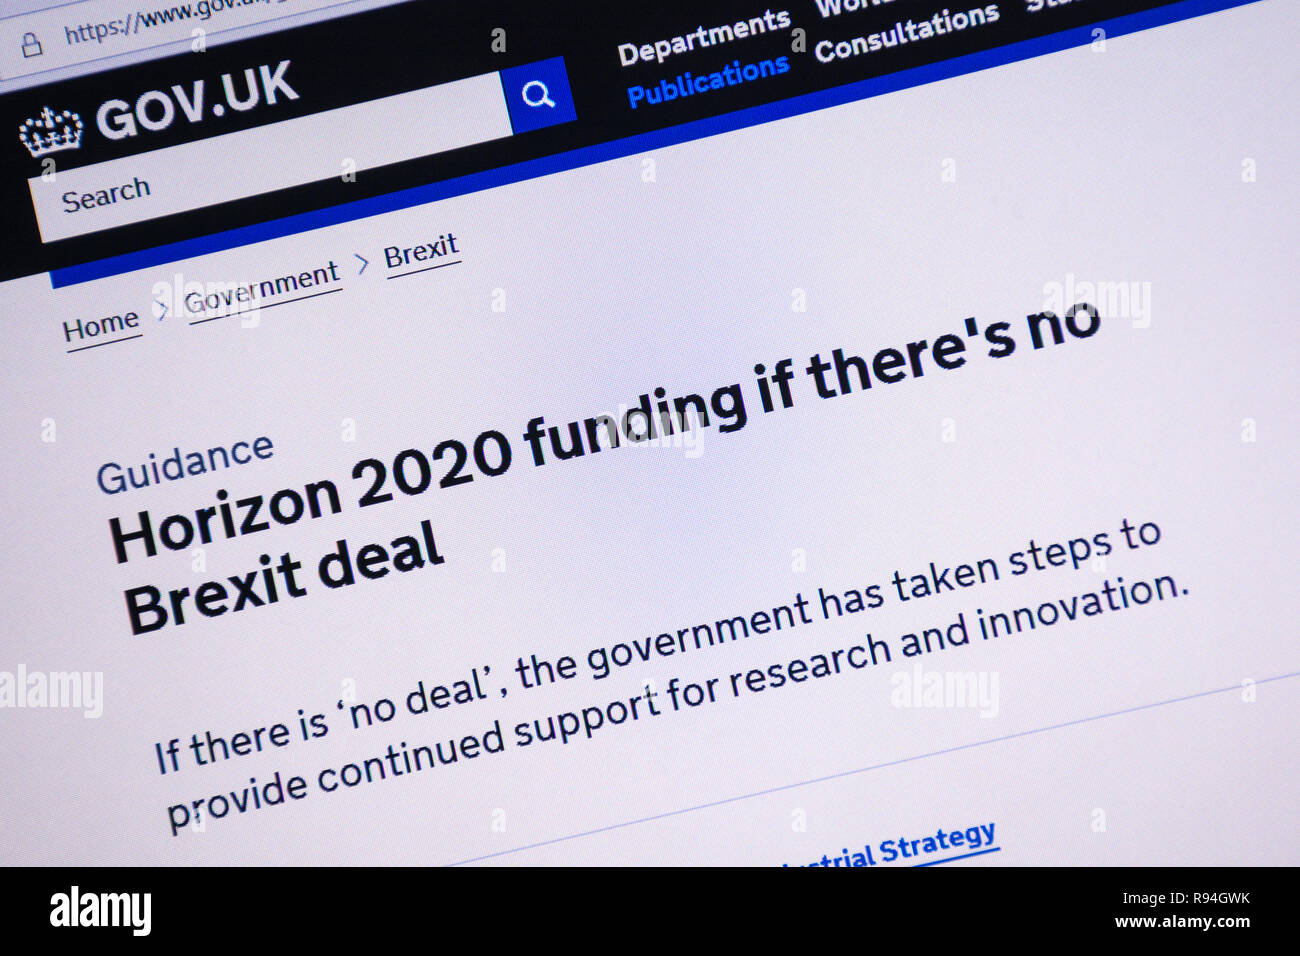 Computer screenshot of the gov.uk website showing information about Horizon 2020 funding if there is no Brexit deal Stock Photo